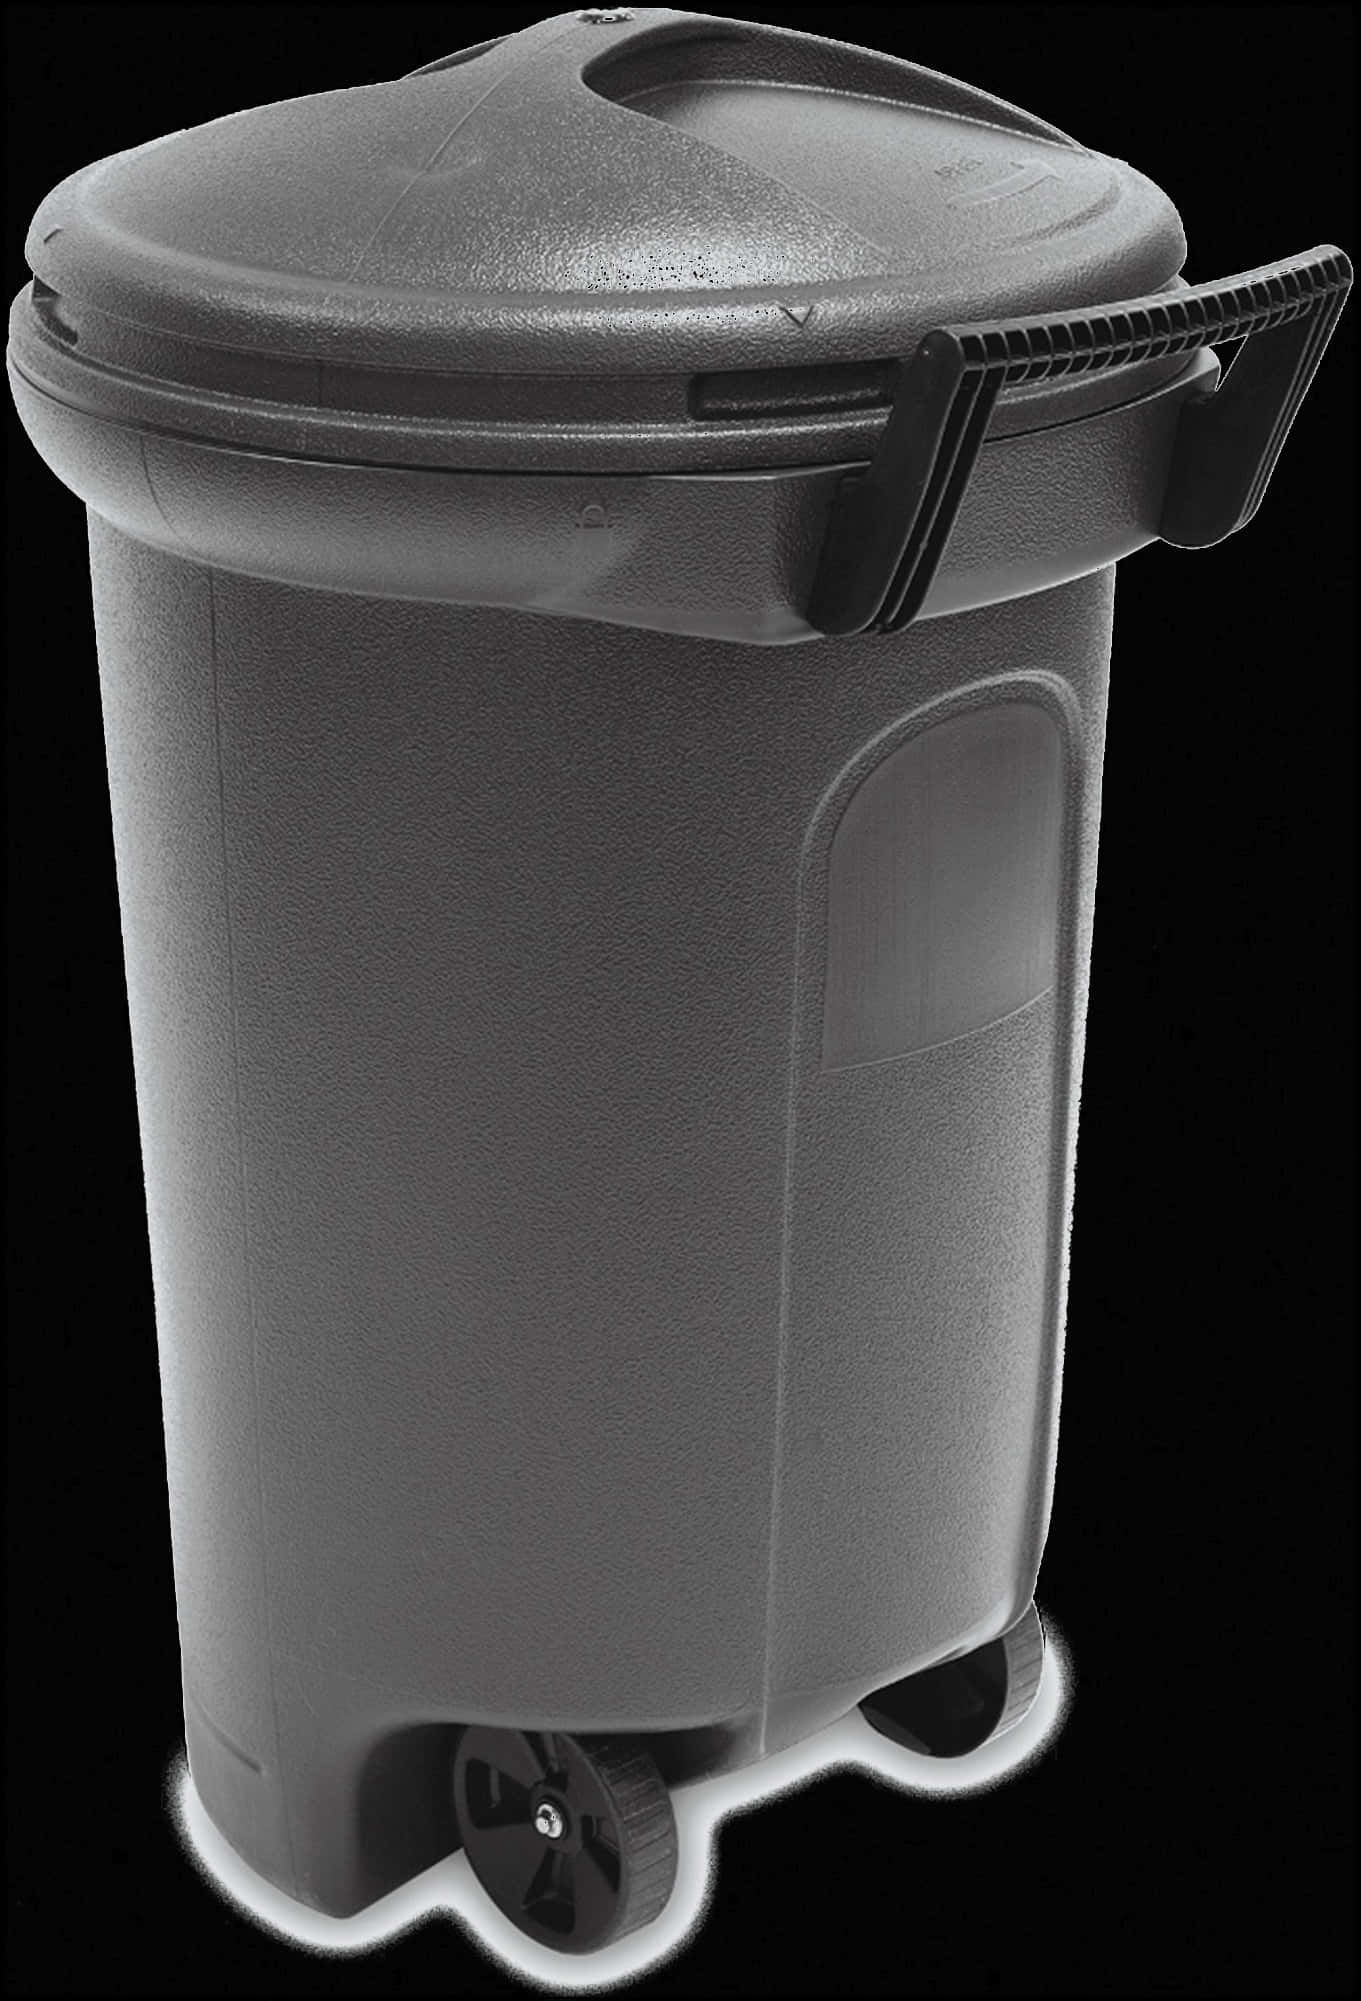 A Grey Trash Can With A Lid